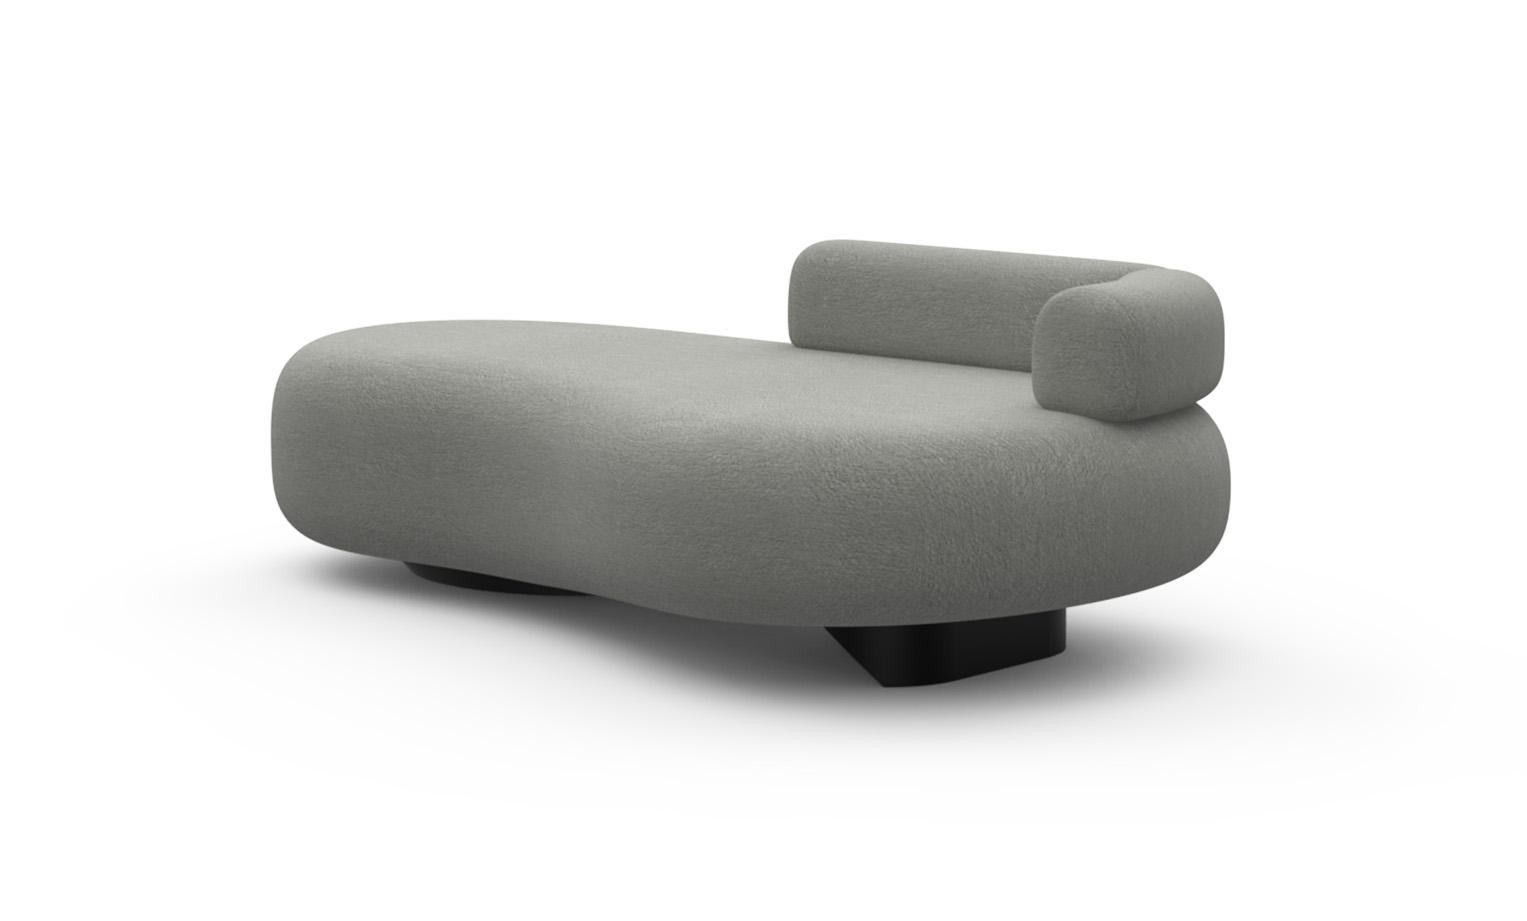 Twins Outdoors Chaise Longue, Contemporary Collection, Handcrafted in Portugal - Europe by Greenapple.
 
Designed by Rute Martins for the Contemporary Collection, the Twins outdoors chaise lounge and curved sofa share the same genes, yet each